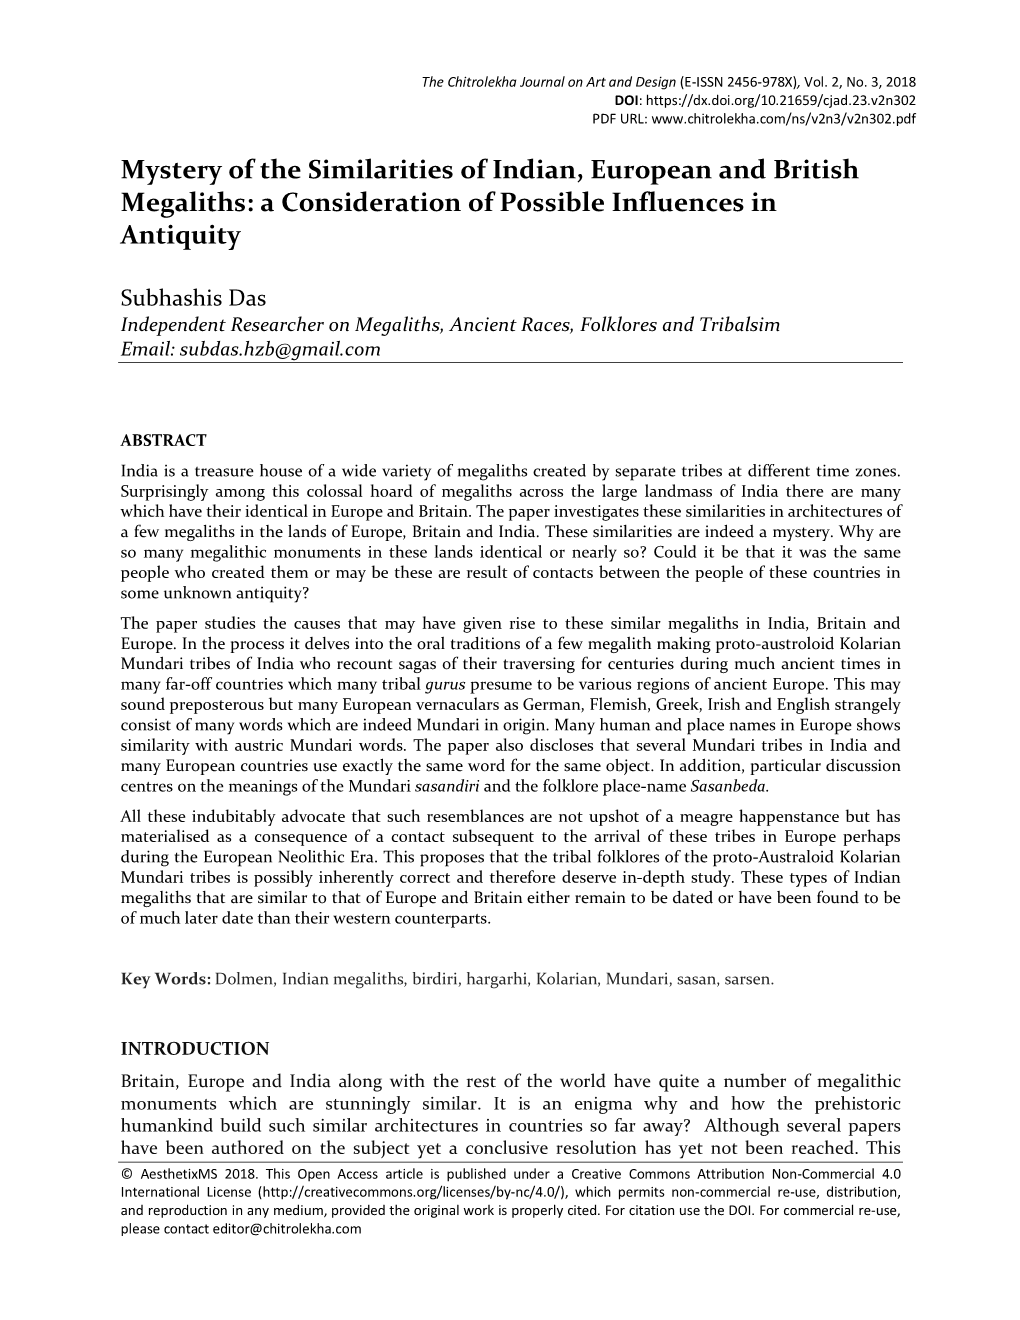 Mystery of the Similarities of Indian, European and British Megaliths: a Consideration of Possible Influences in Antiquity